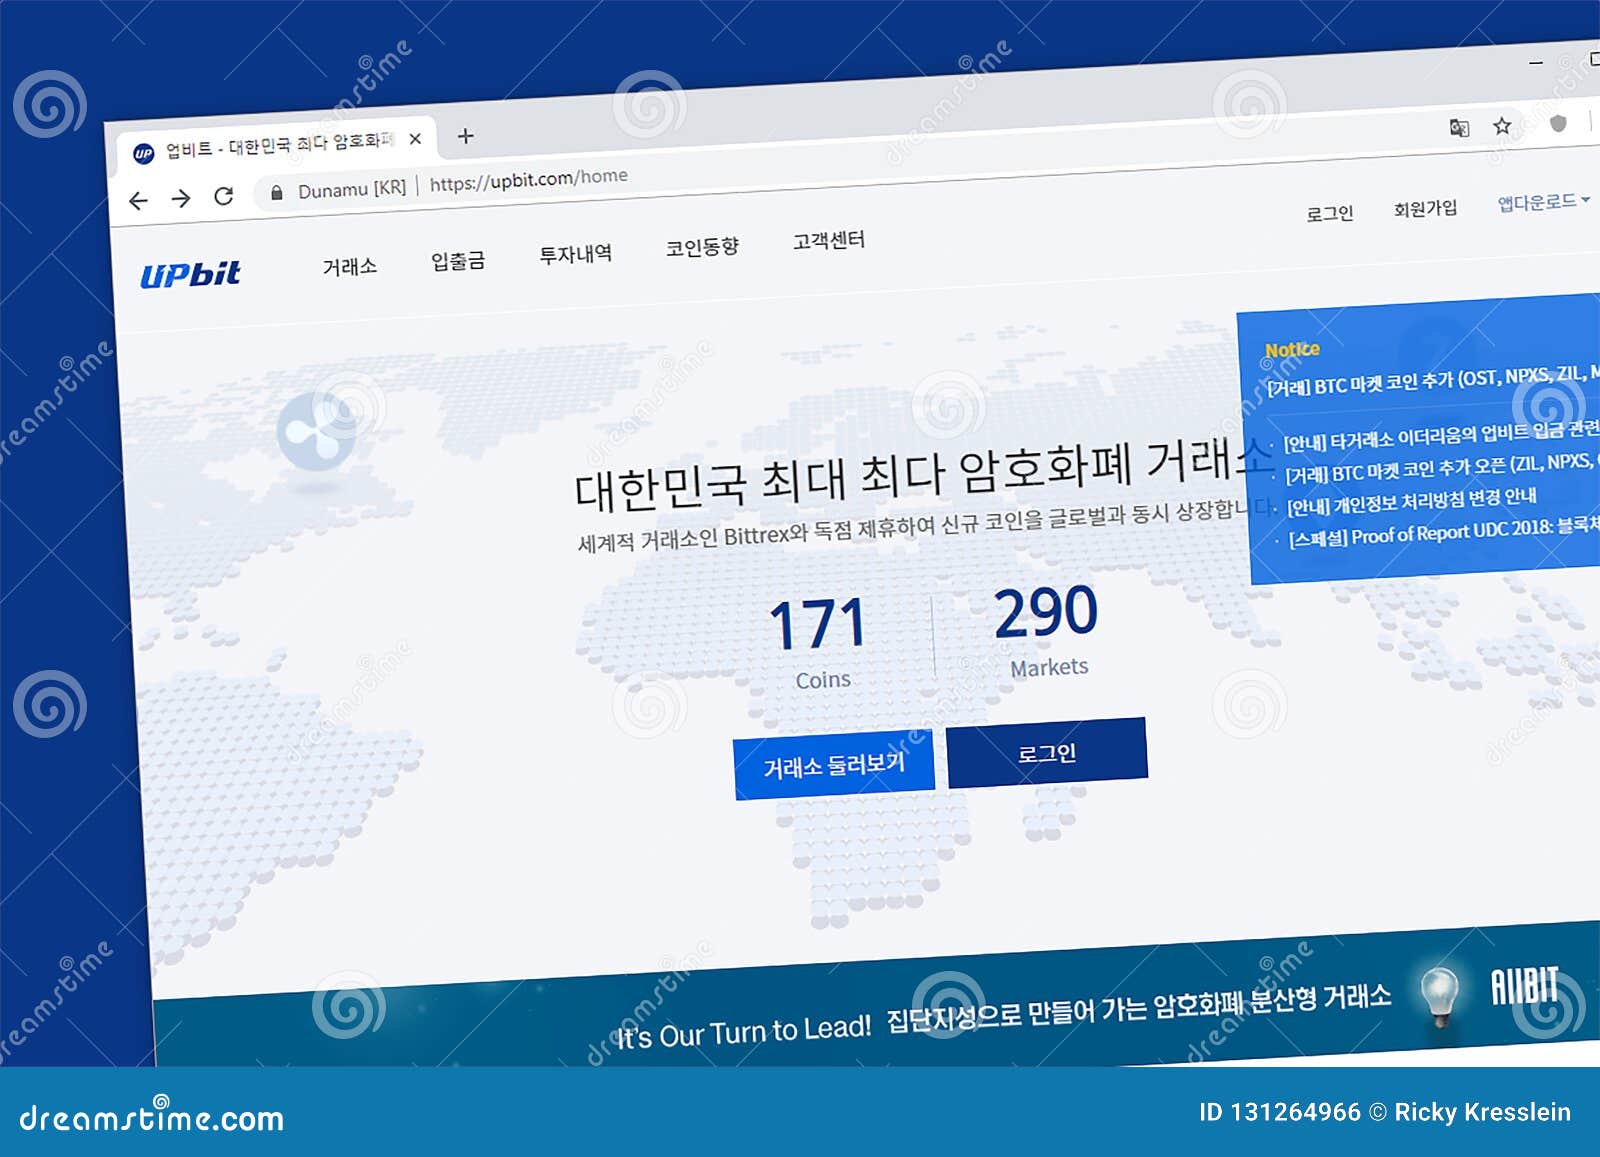 UPbit South Korean Bitcoin Crypto Currency Exchange ...